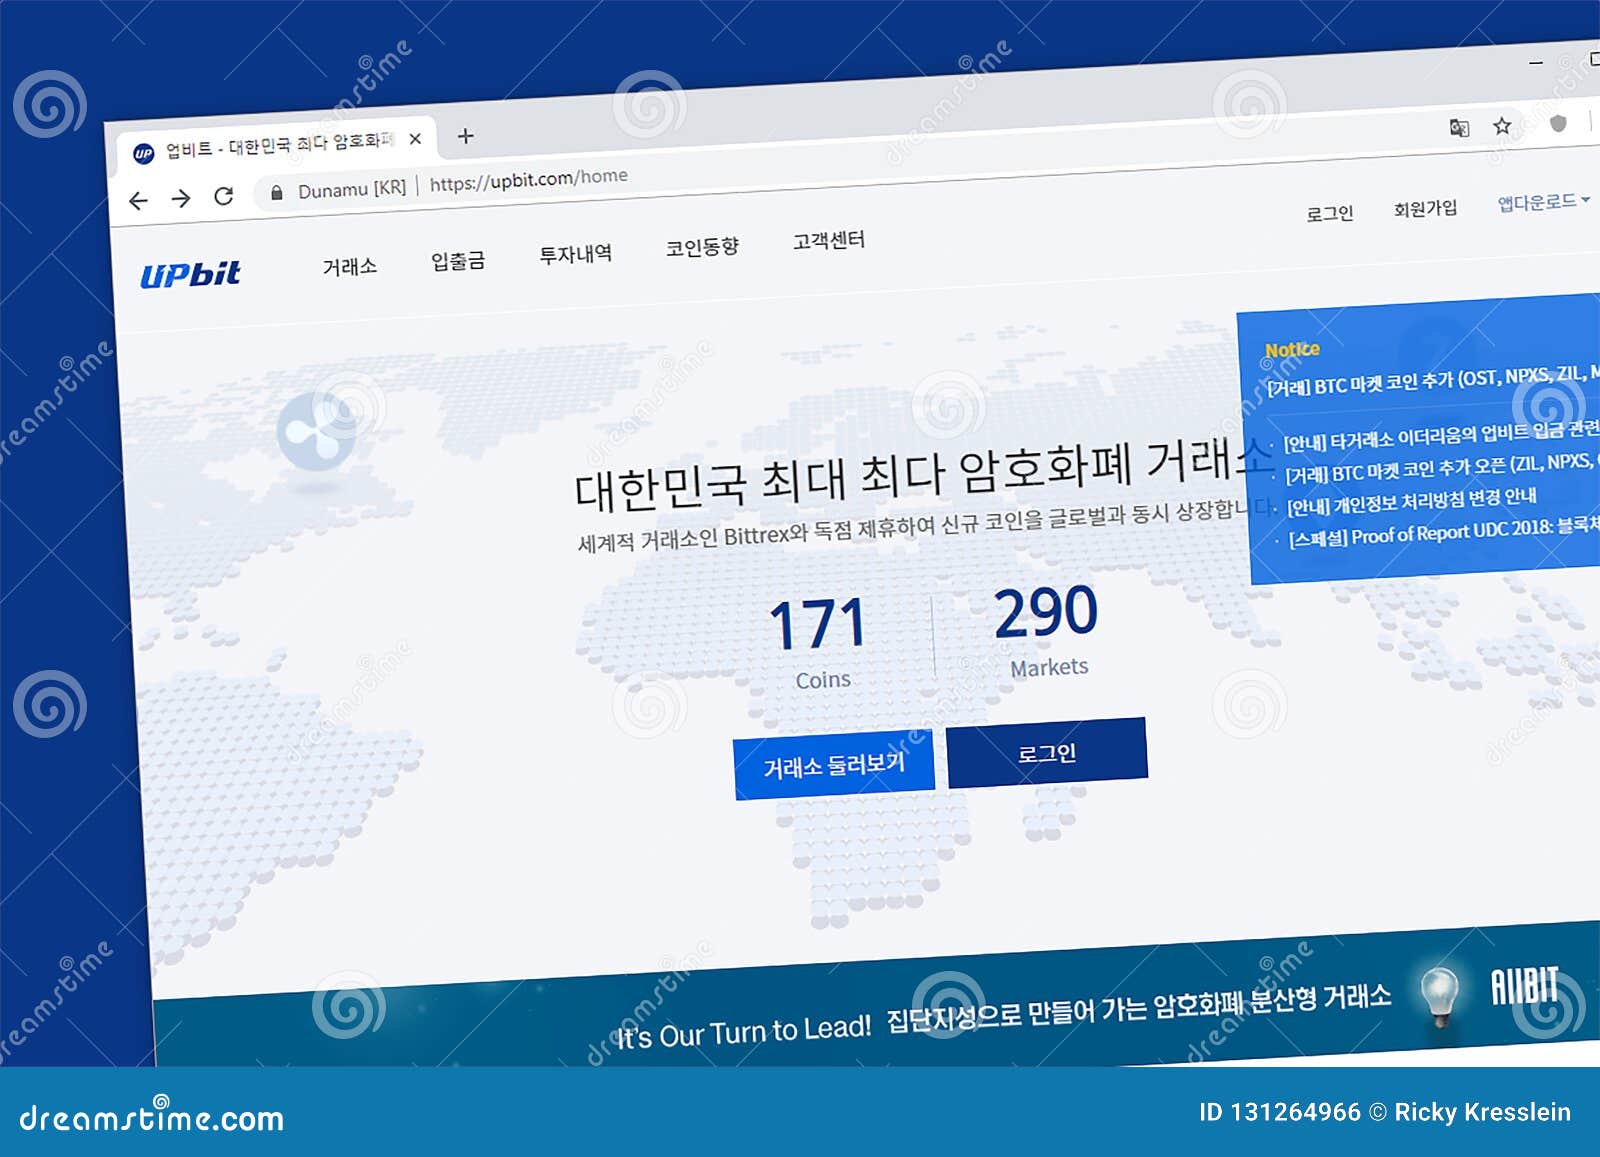 UPbit South Korean Bitcoin Crypto Currency Exchange ...